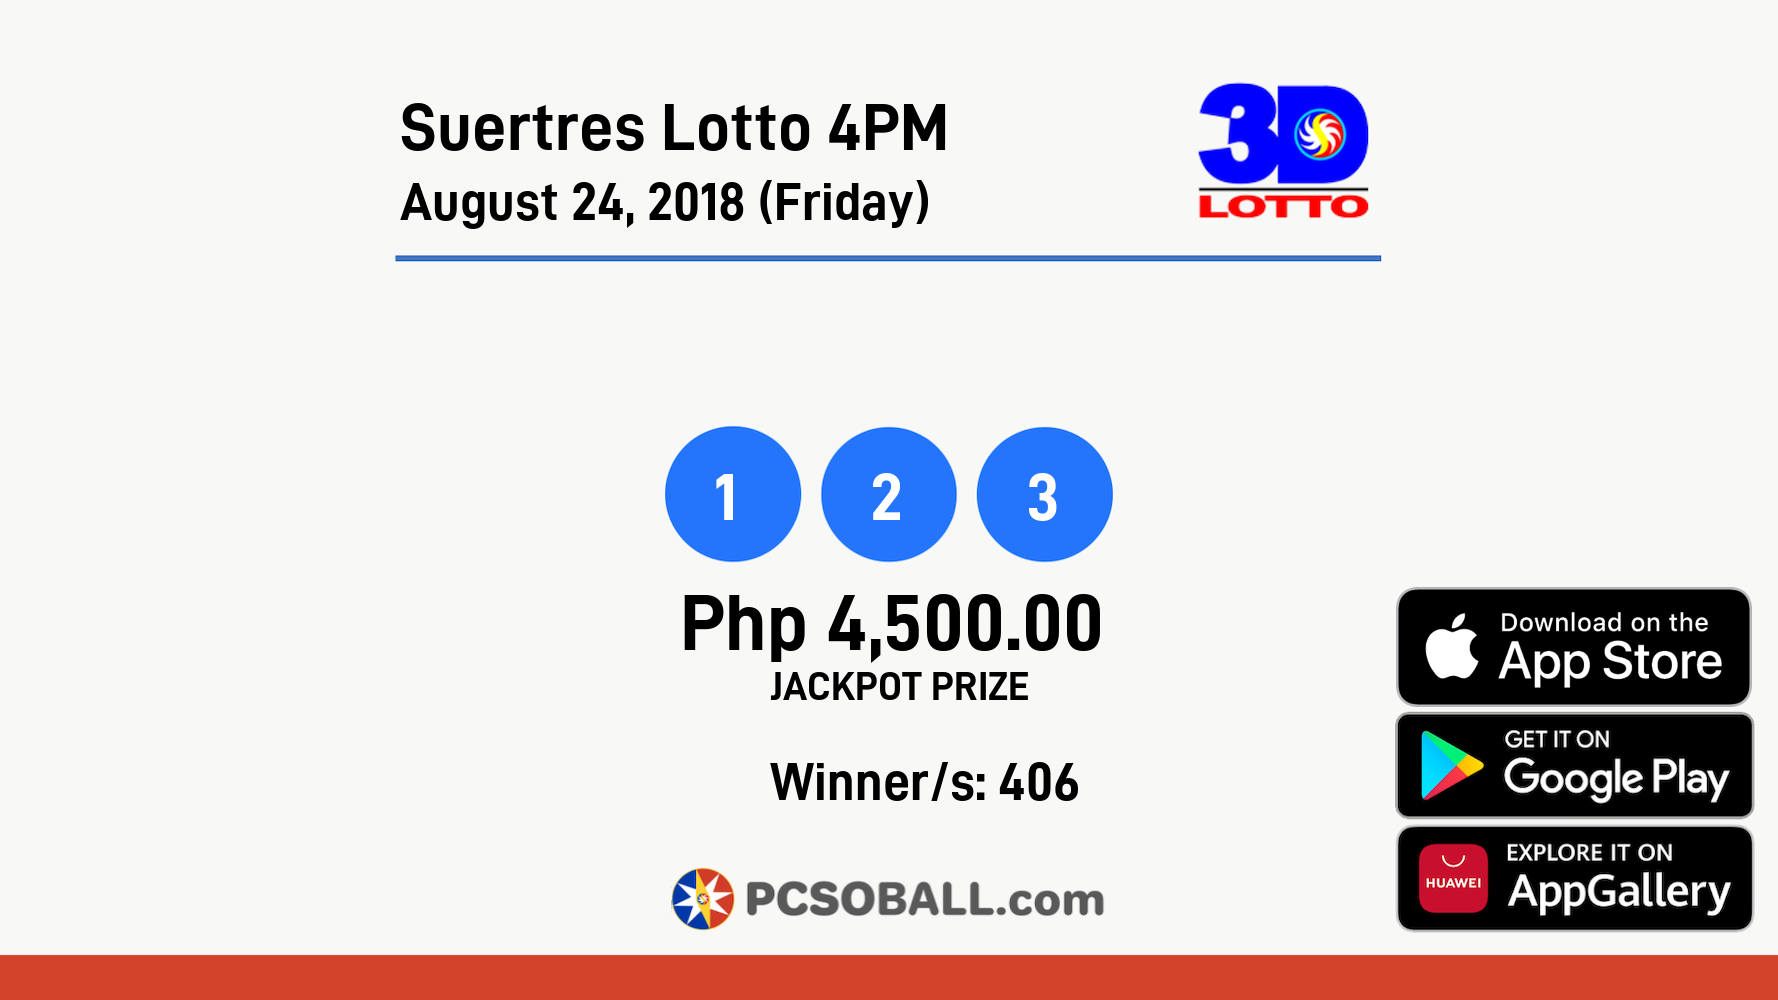 Suertres Lotto 4PM August 24, 2018 (Friday) Result